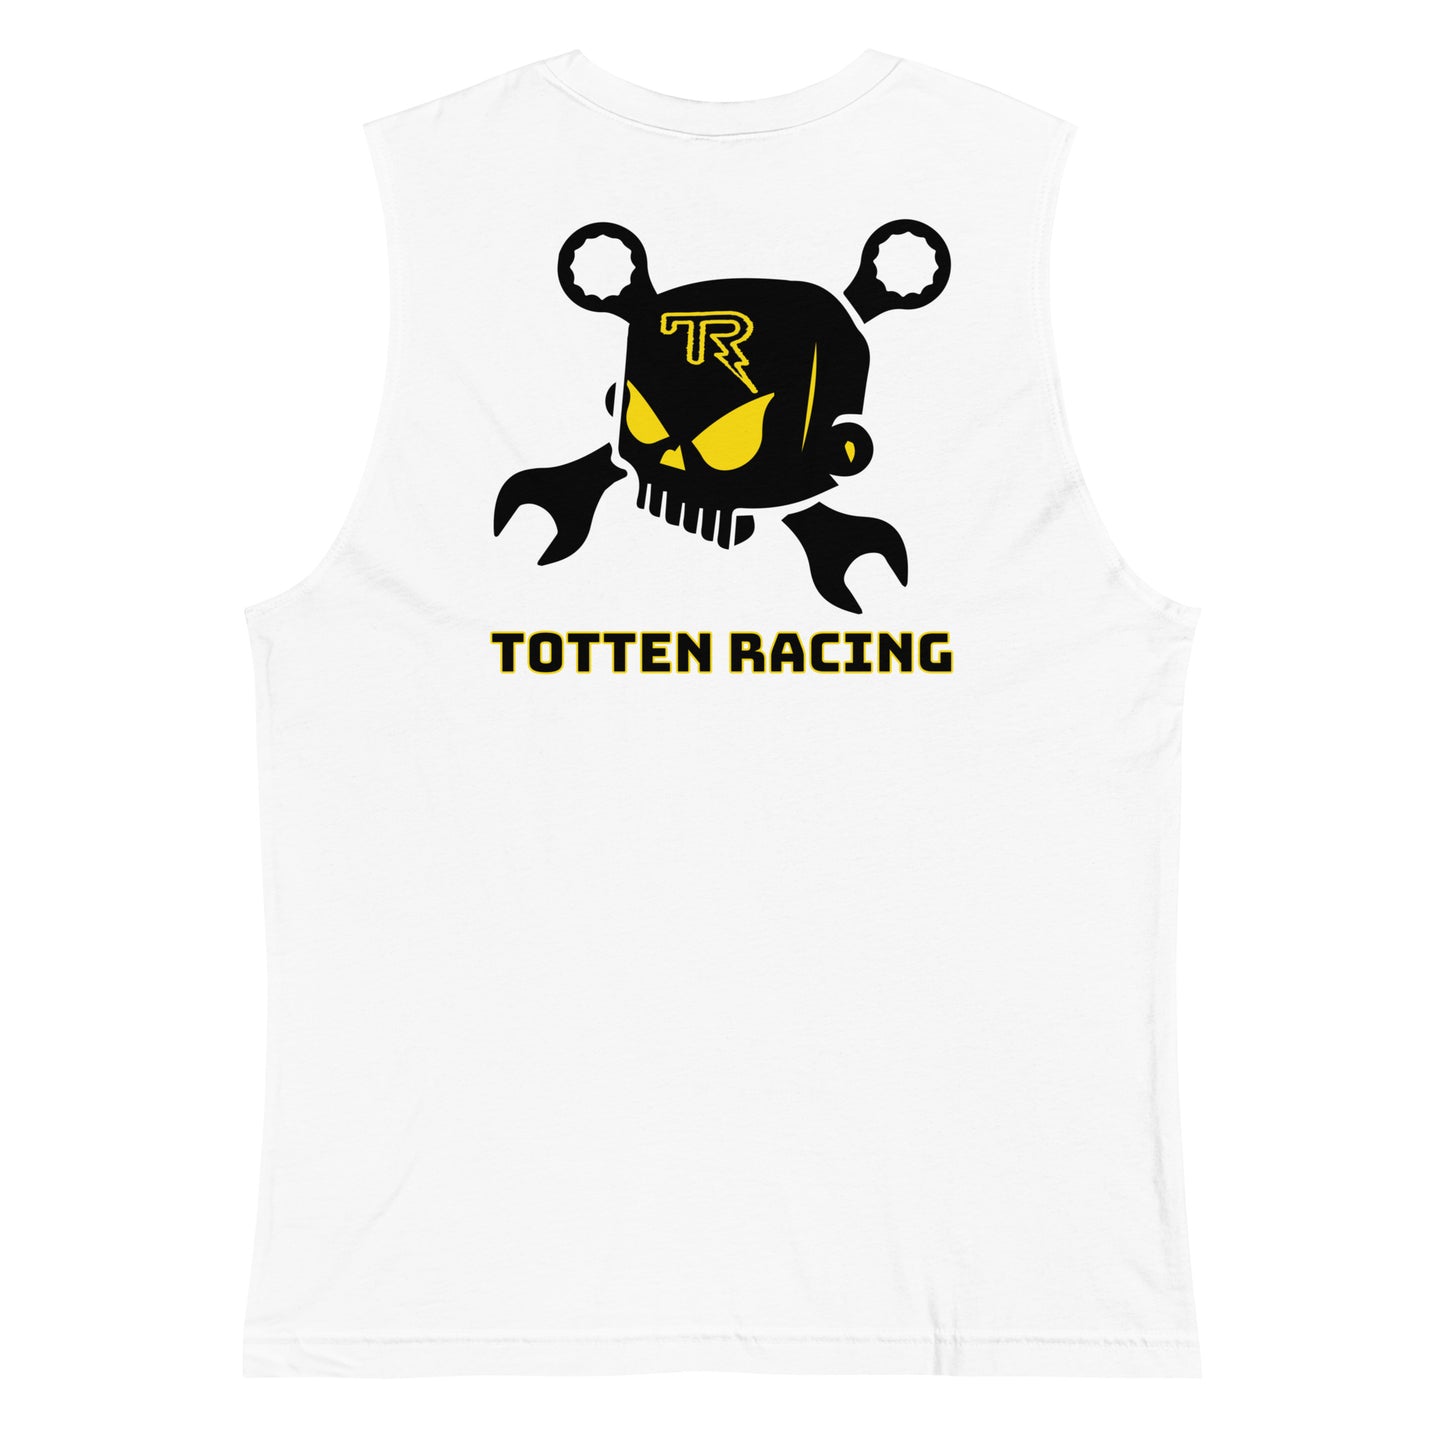 TOTTEN RACING - FRONT AND BACK - Muscle Shirt